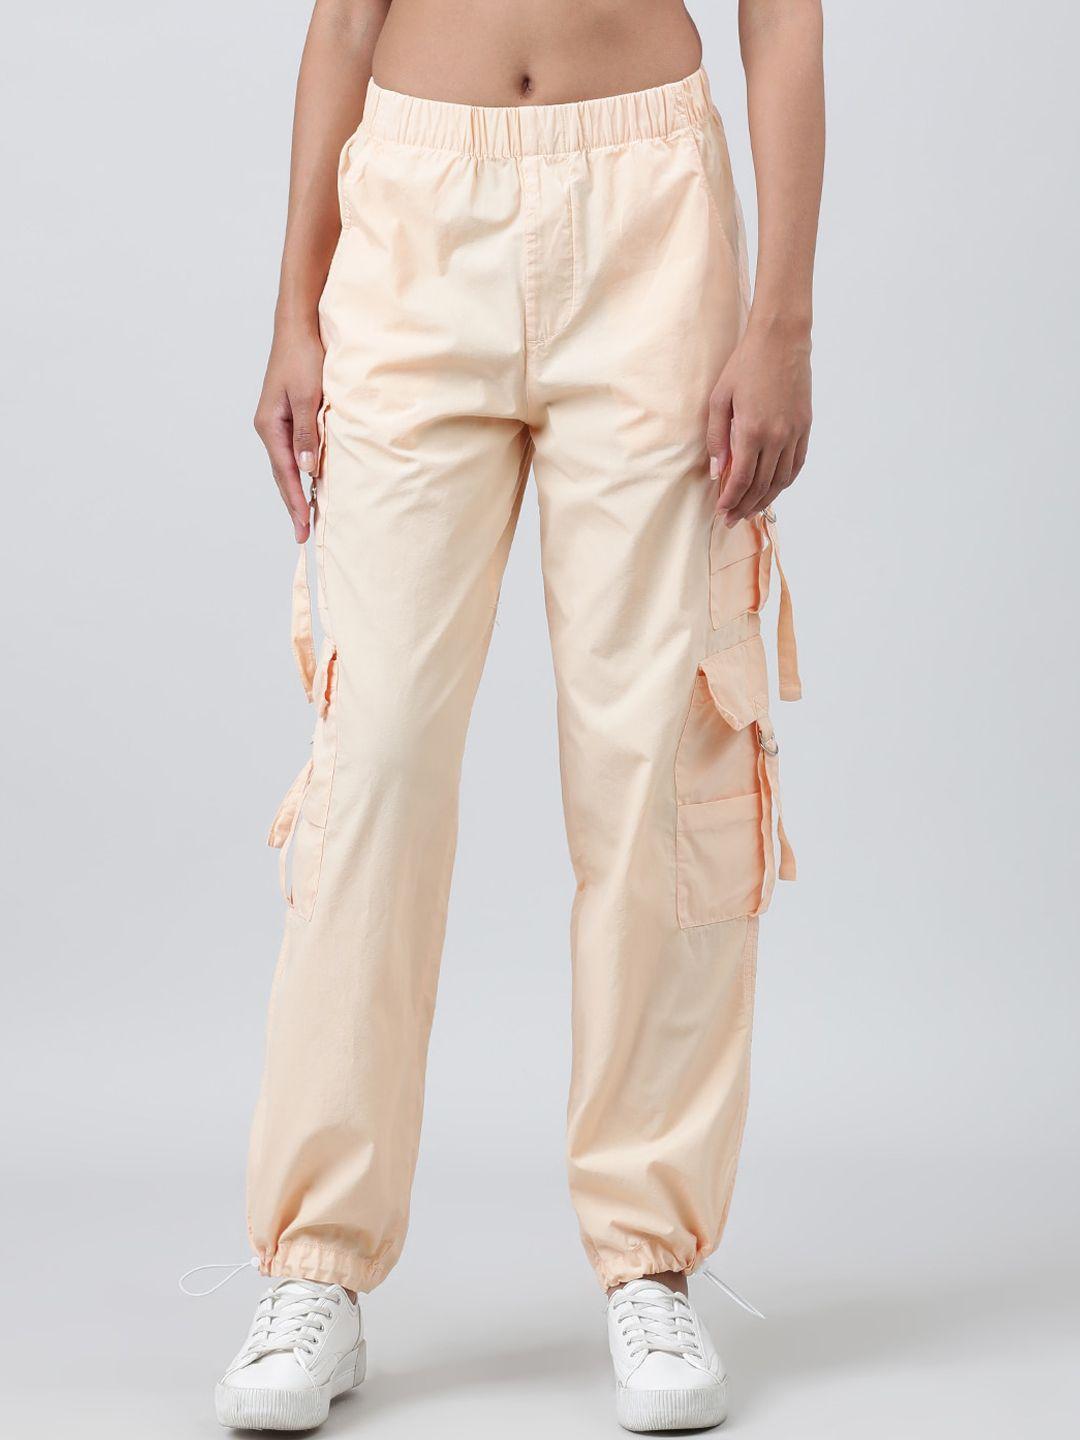 bene-kleed-women-loose-fit-high-rise-cotton-joggers-trouser